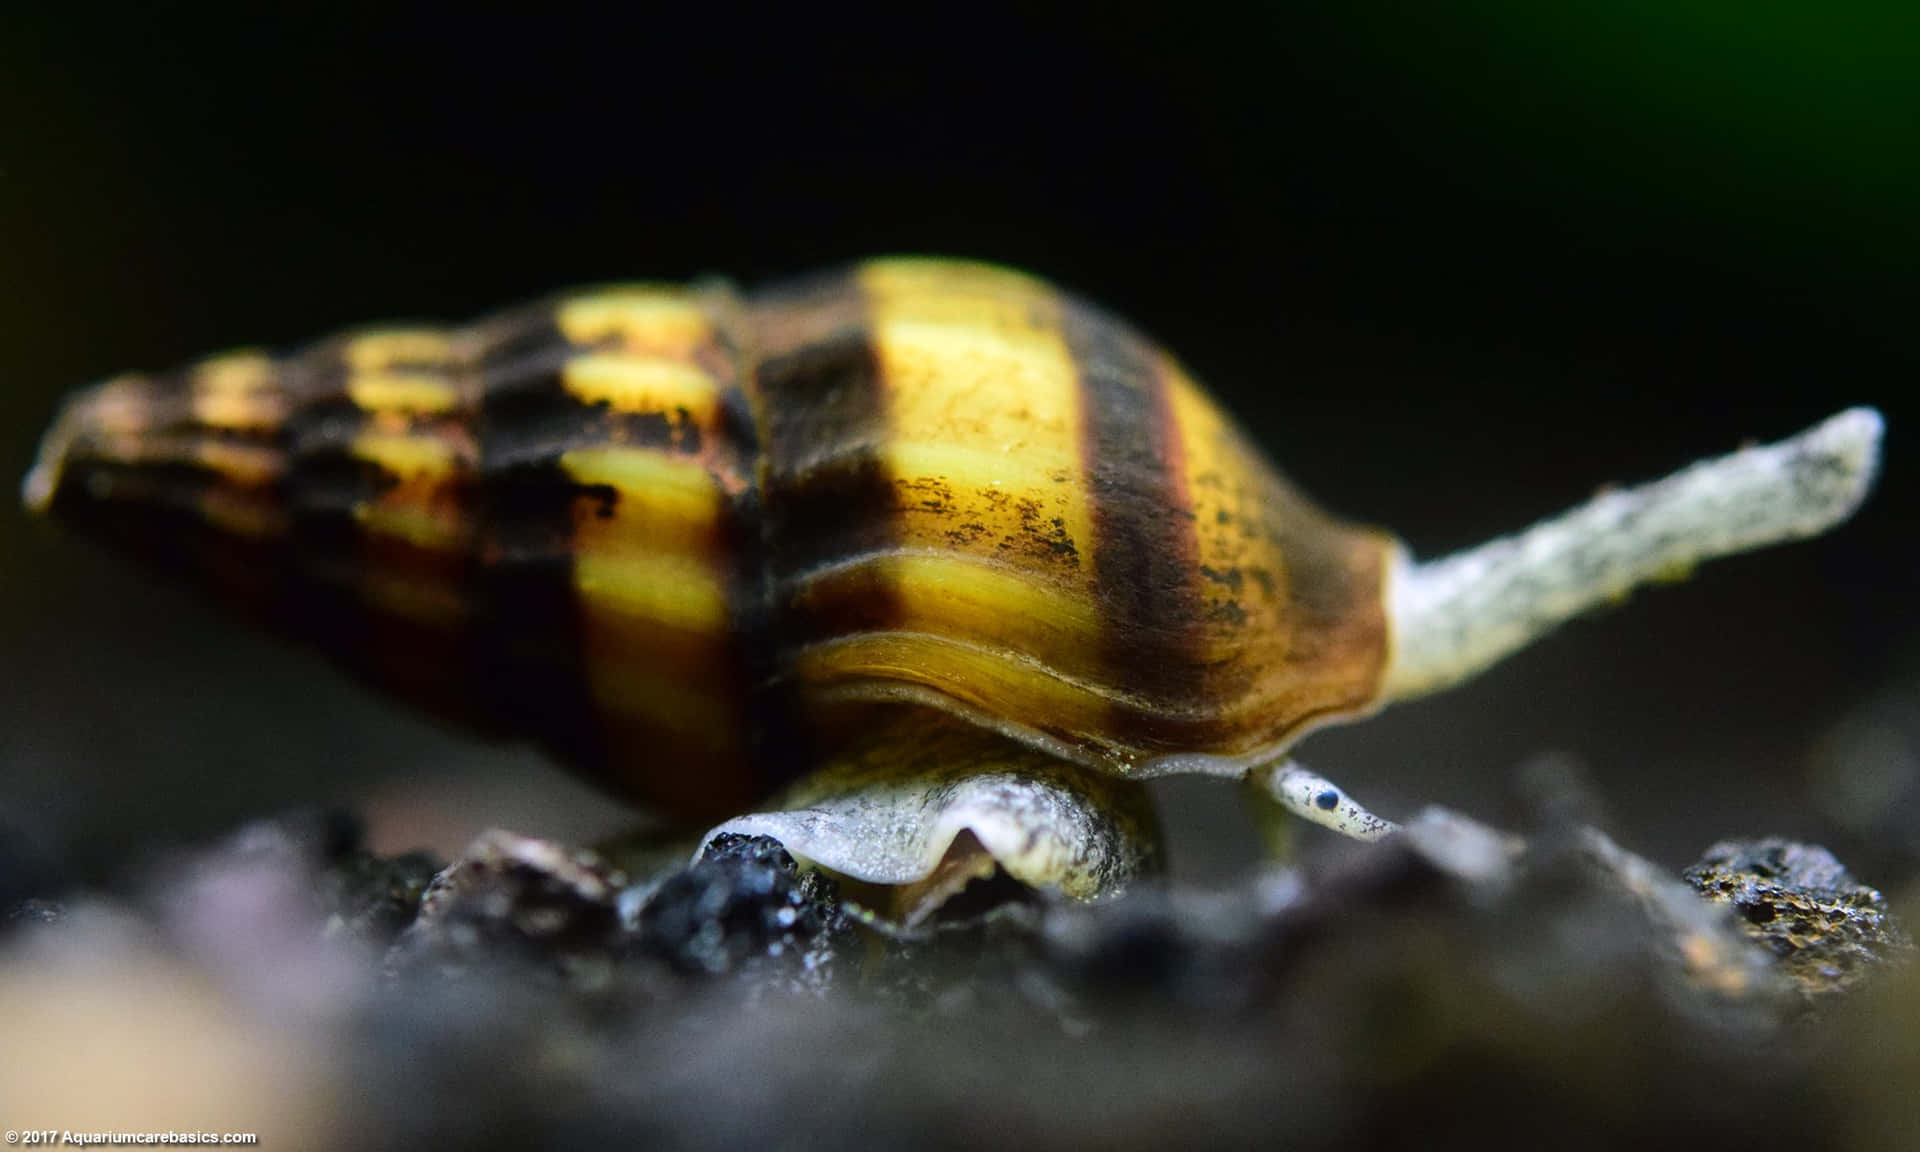 A Snail Walking On The Ground With A Yellow And Black Stripe